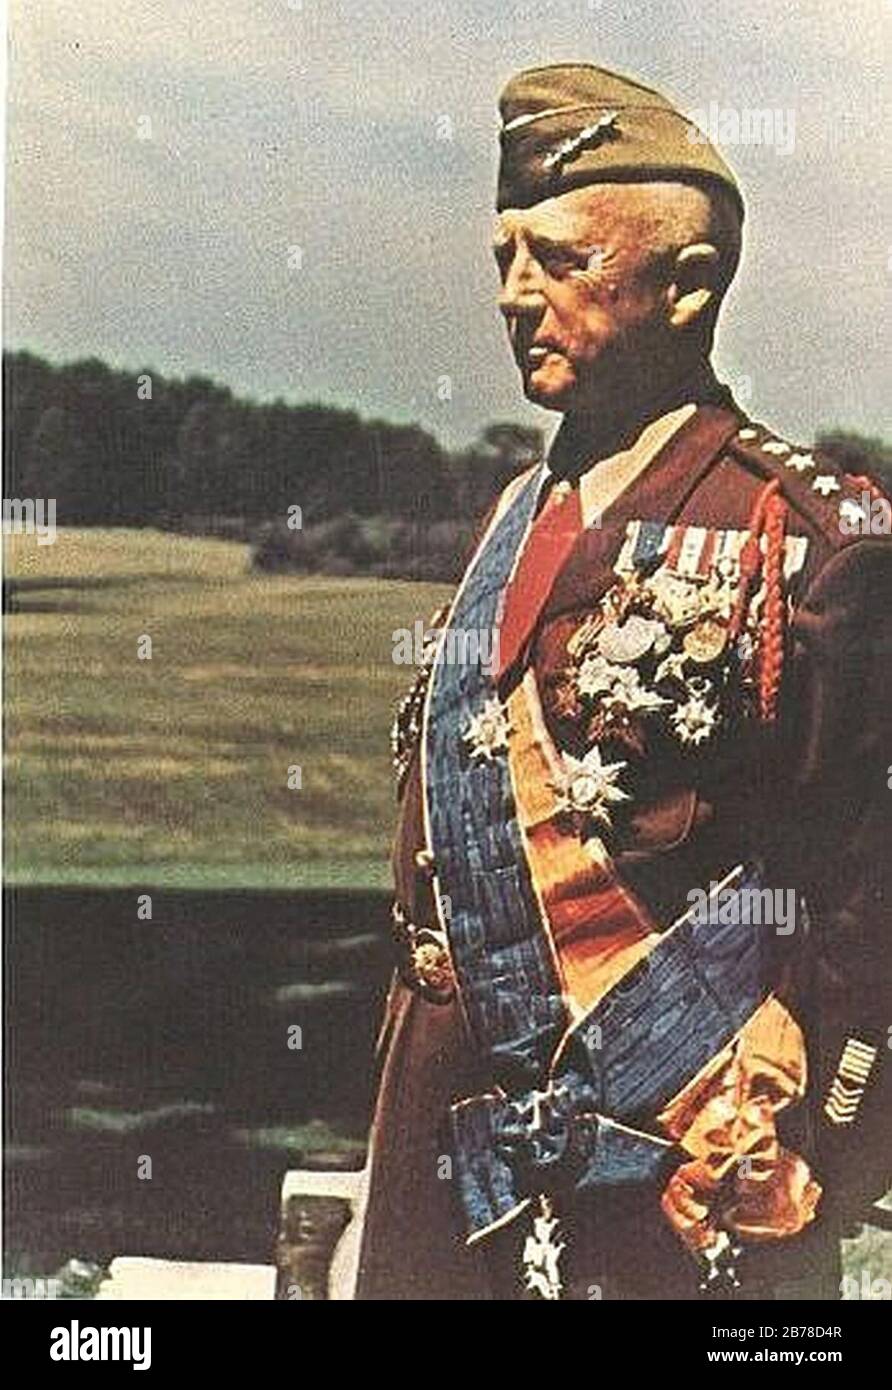 George Patton US Army General. Stock Photo